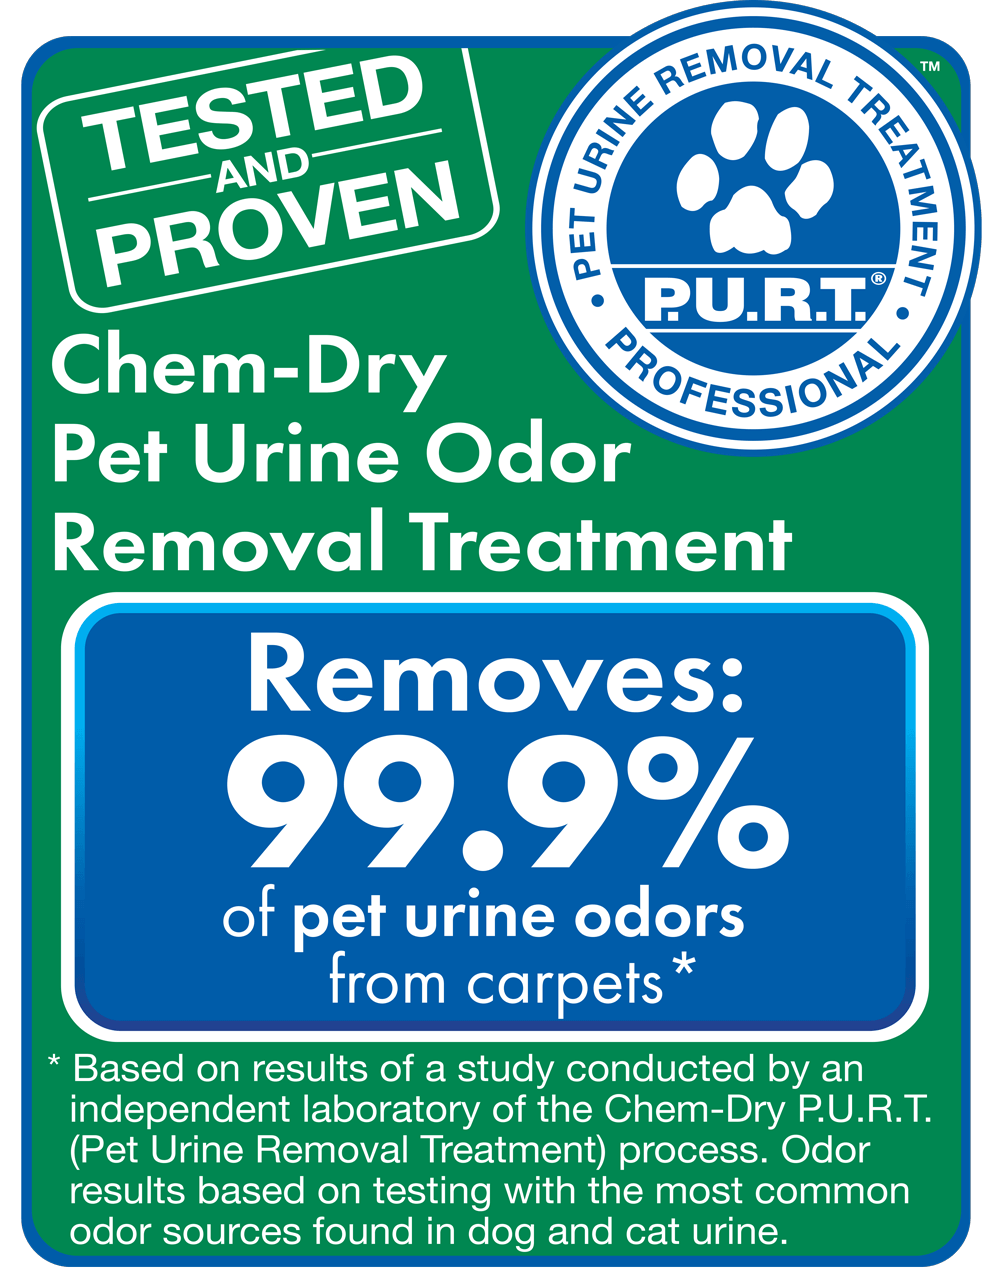 tested and proven. chem-dry pet urine odor removal treatment removes 99.9% of pet urine odors from carpets (based on results of a study conducted by an independent laboratory of the Chem-Dry P.U.R.T. (Pet Urine Removal Treatment) process. Odor results based on testing with the most common odor sources found in dog and cat urine.